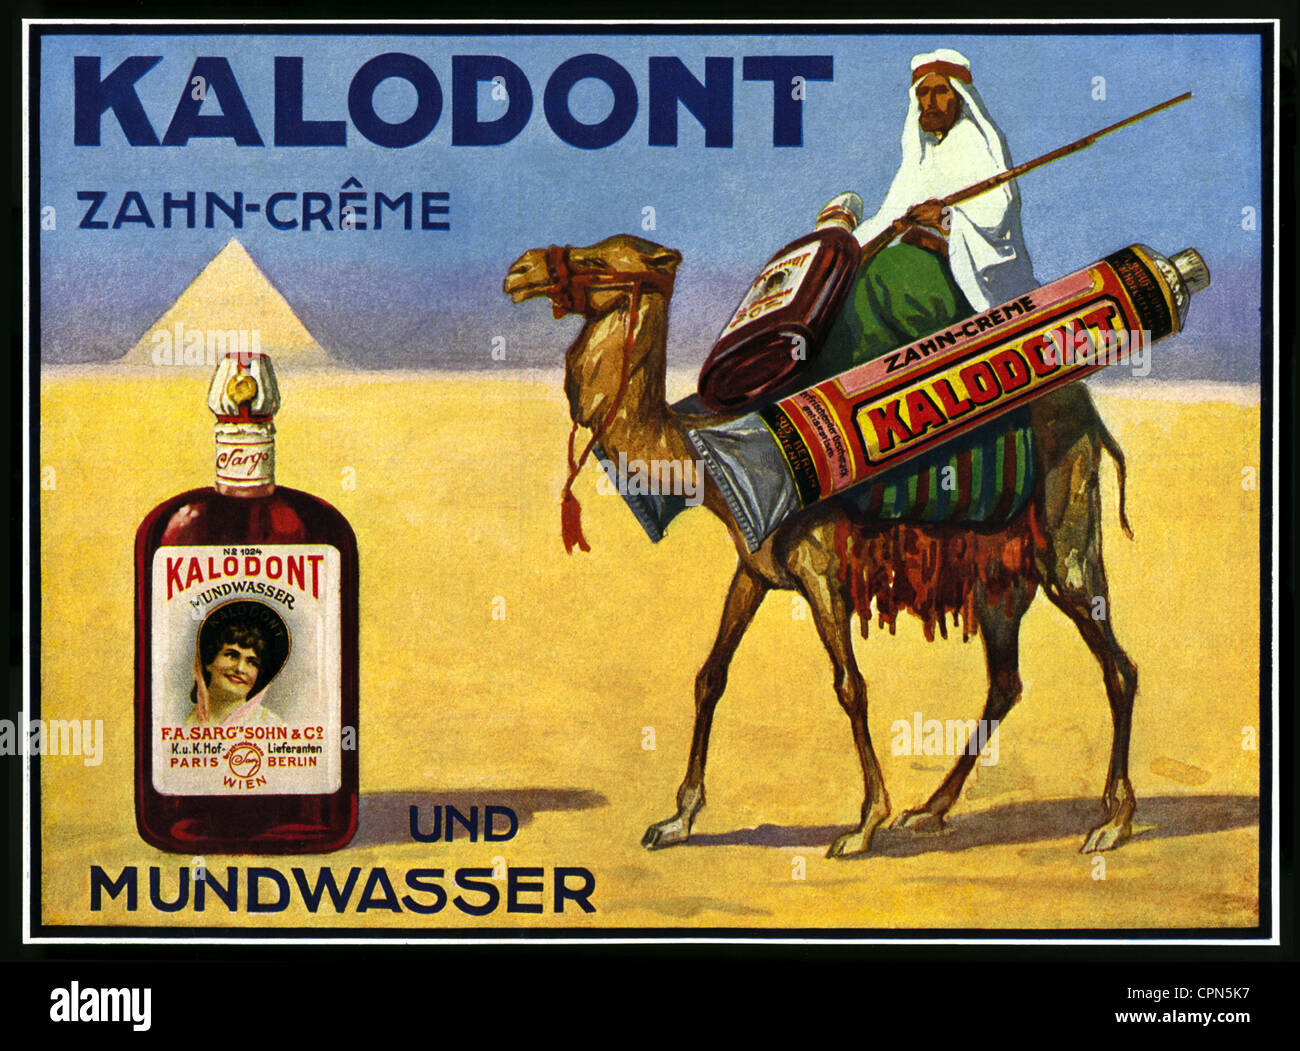 advertising, cosmetics, Kalodont toothpaste and mouthwash, Arab is riding on camel through the desert, made by: Sarg's Son & Co, Royal and Imperial court deliverer, Paris, Berlin, Vienna, Germany, 1914, Additional-Rights-Clearences-Not Available Stock Photo